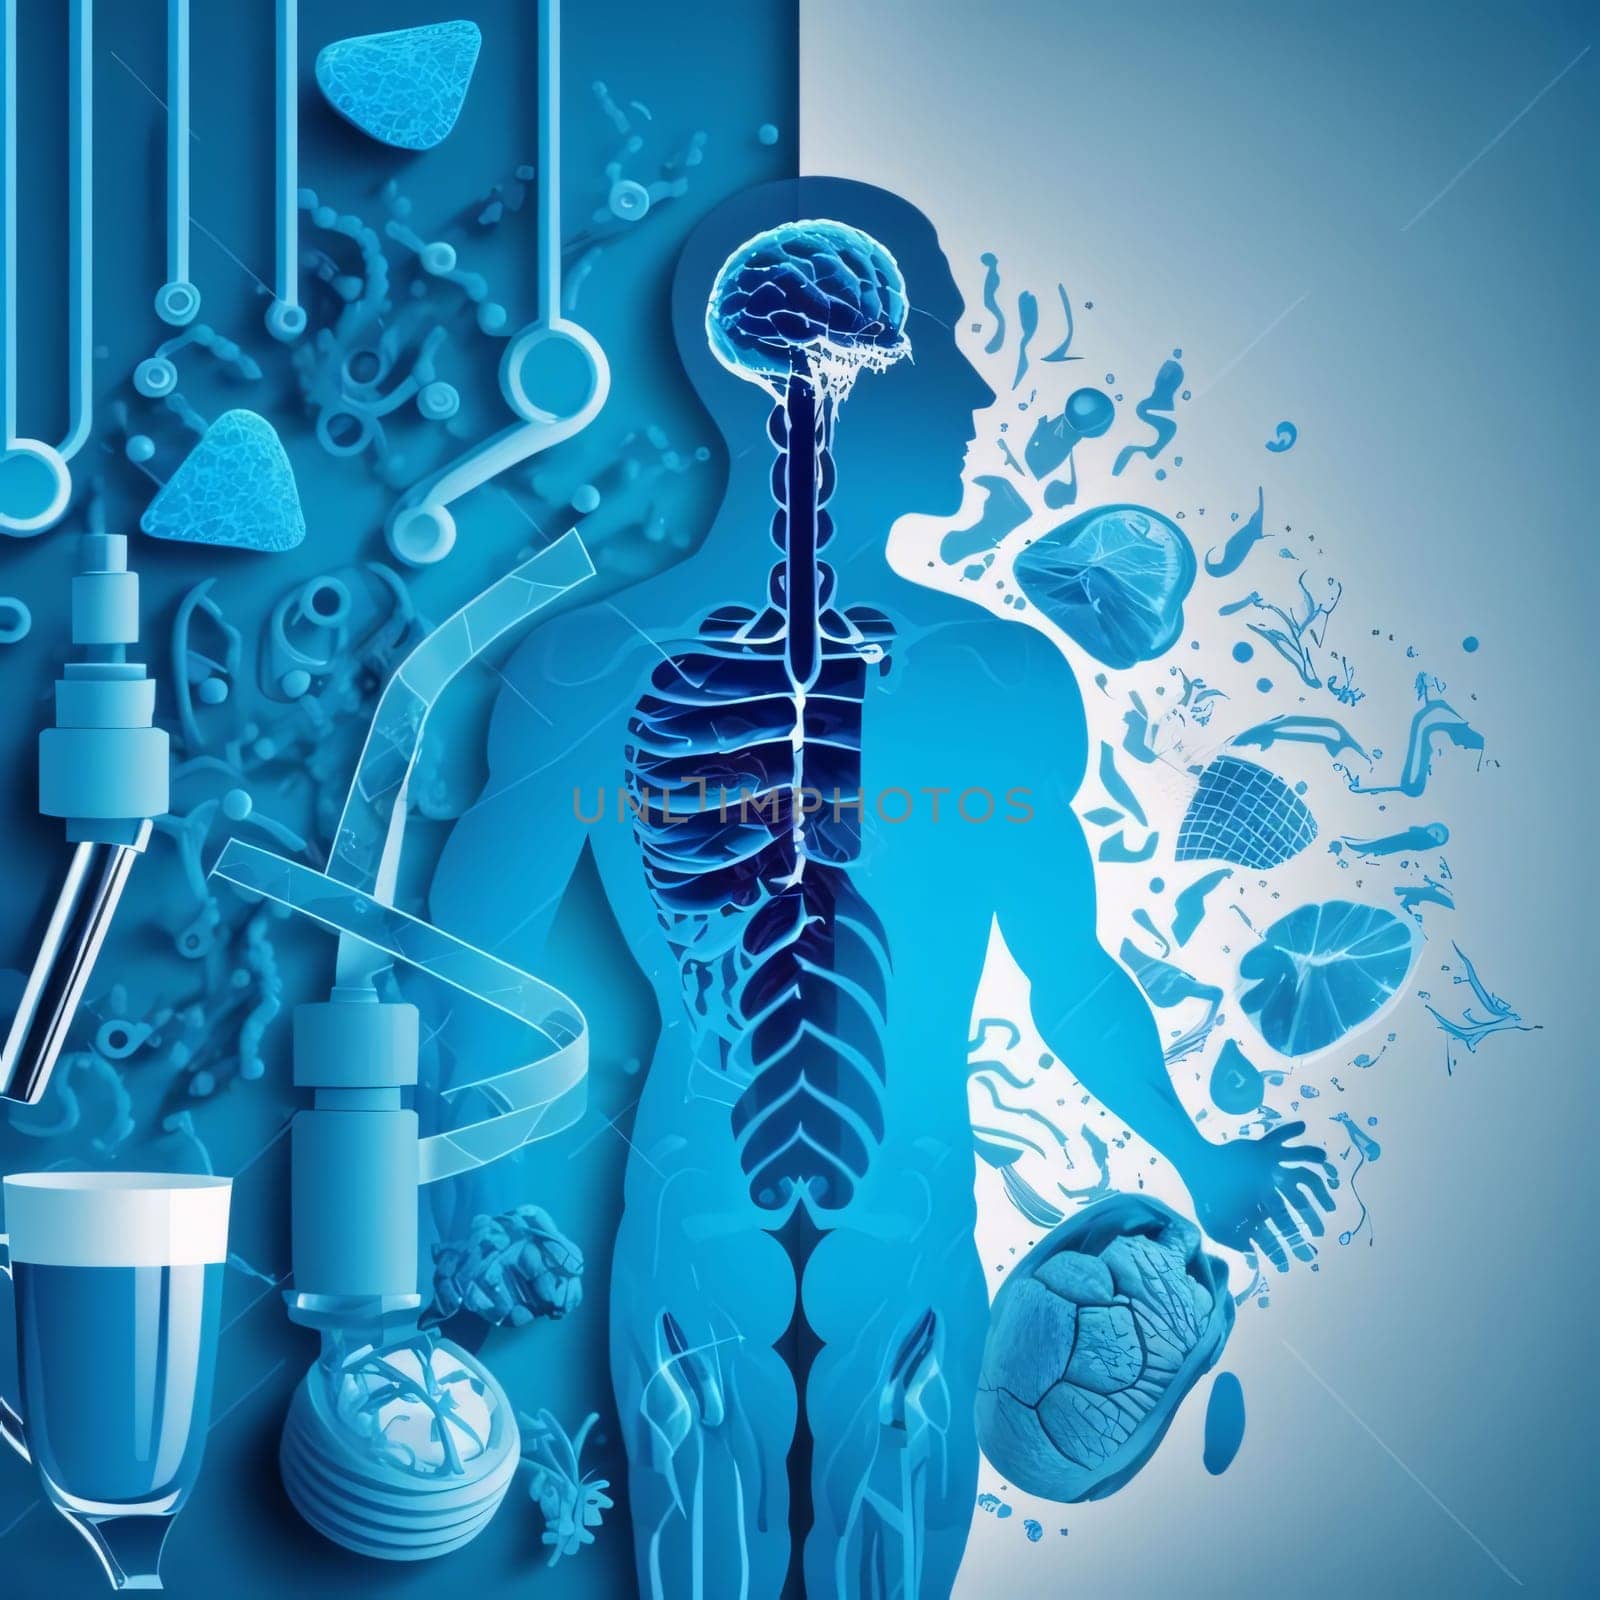 Abstract background design: Human anatomy in blue background. 3d illustration. Medical concept.